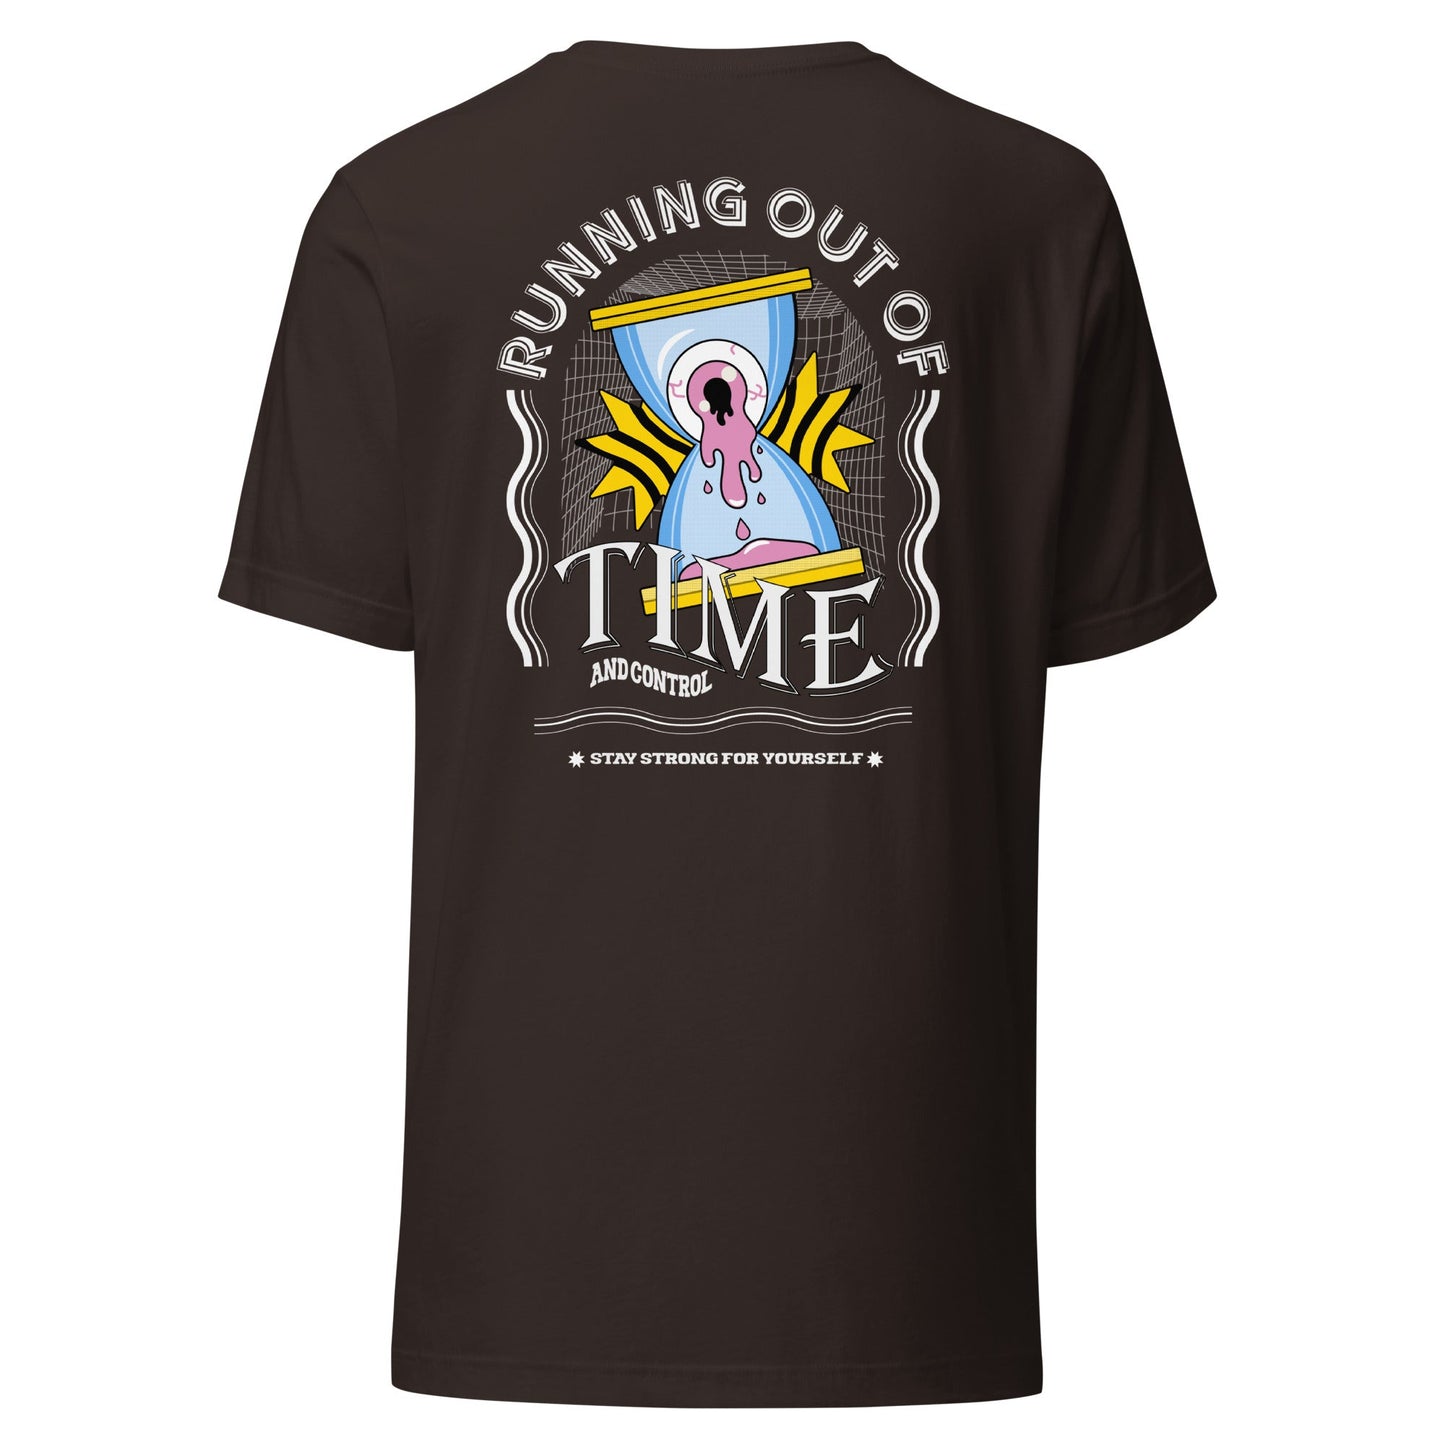 Running Out of Time T-Shirt - Embrace Every Moment with this Timeless Design | Motivational and Trendy Tee